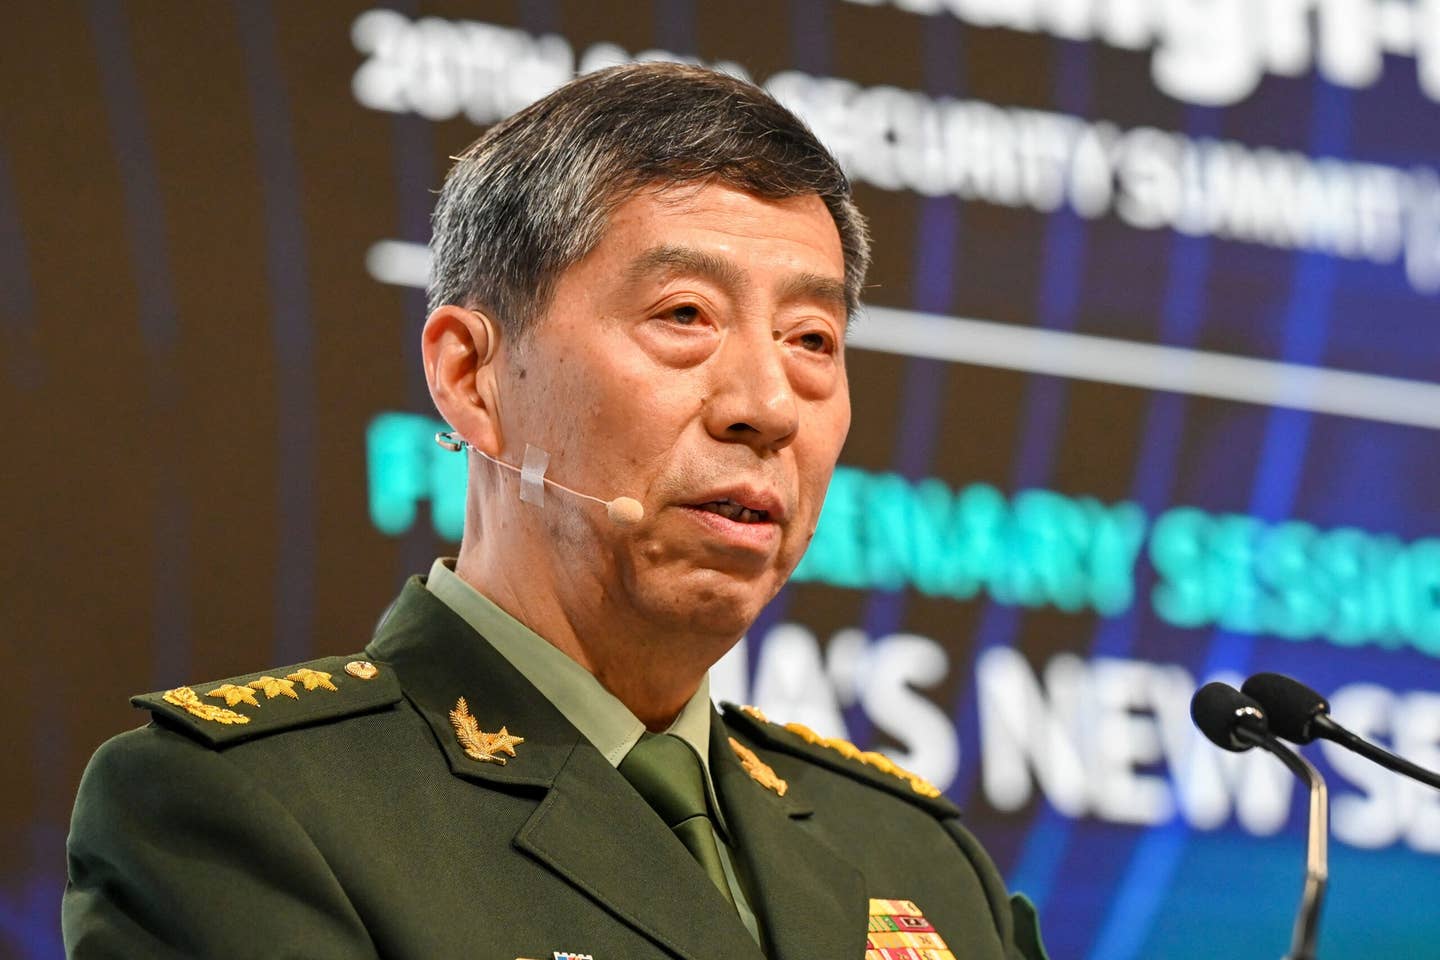 China’s Minister of National Defence Li Shangfu delivers a speech during the Shangri-La Dialogue summit in Singapore on June 4, 2023. <em>Photo by ROSLAN RAHMAN/AFP via Getty Images</em>